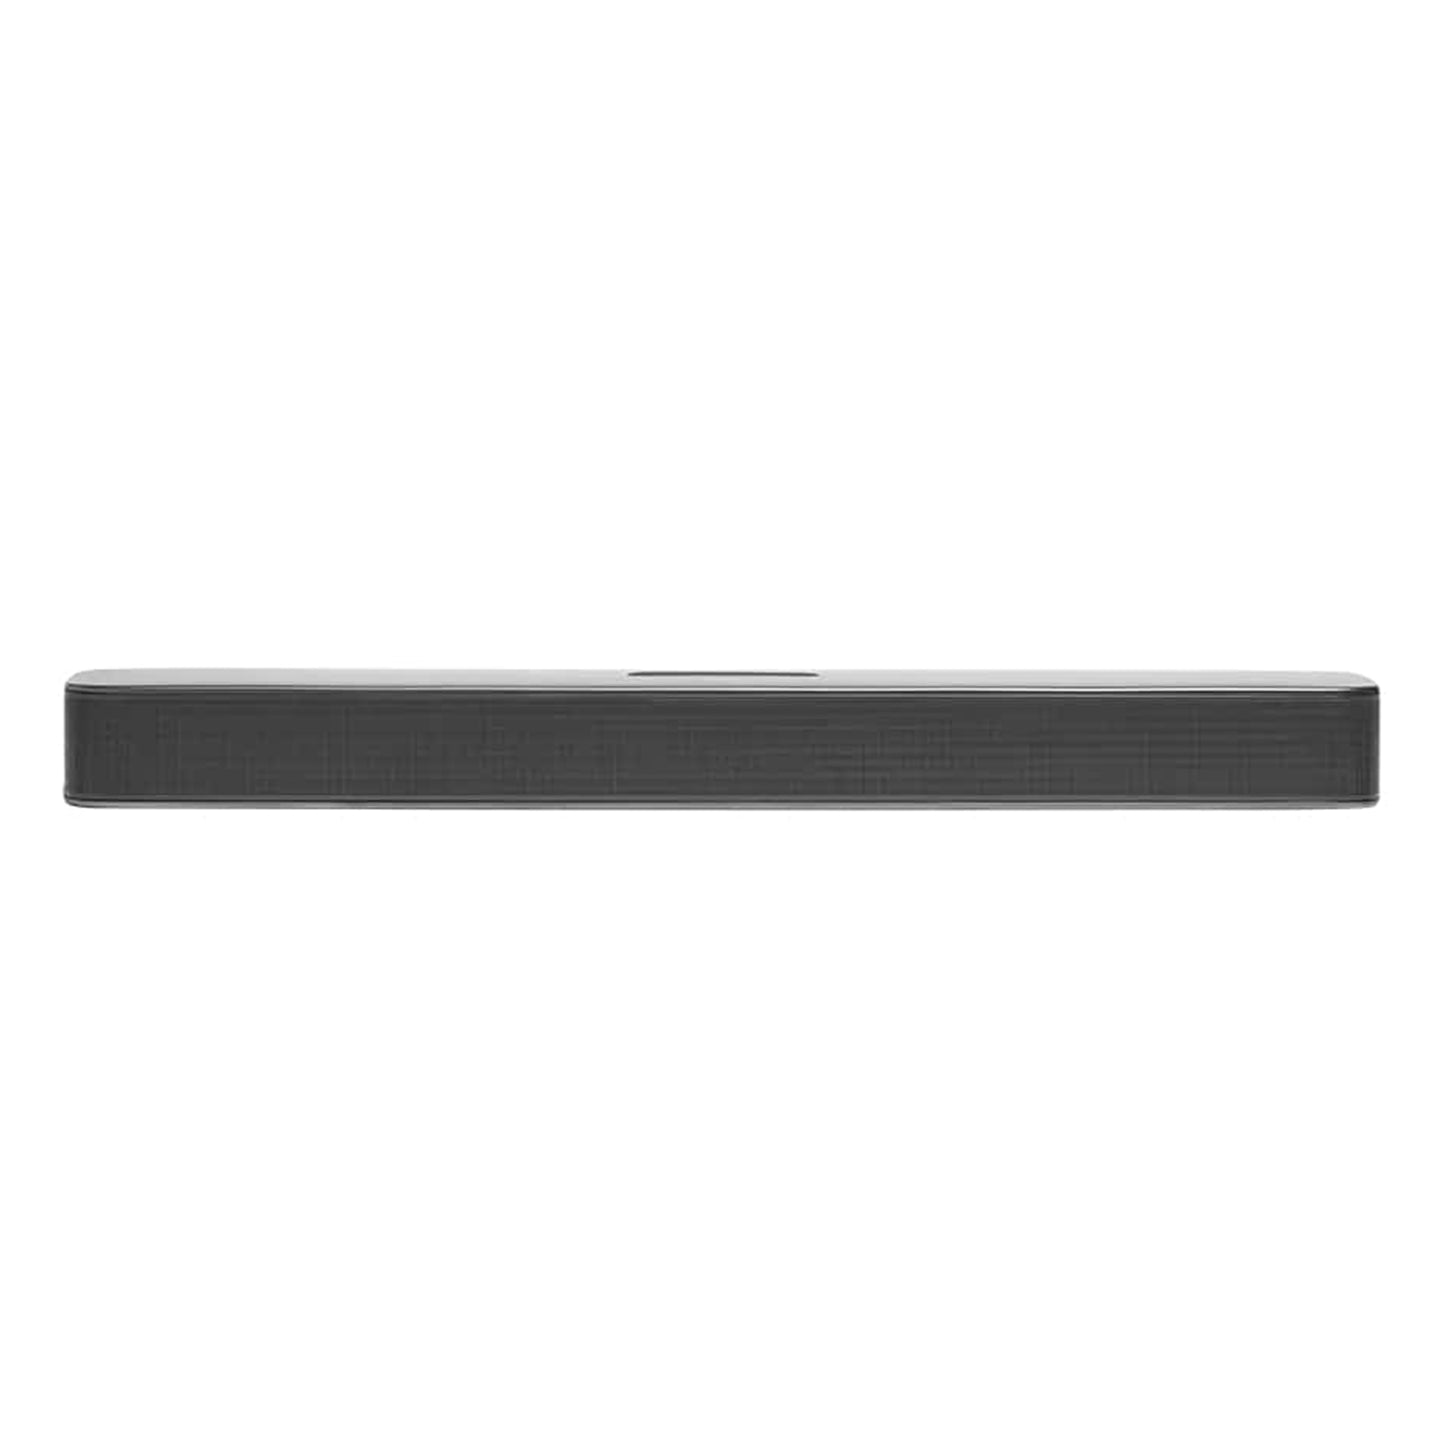 JBL Bar 2.0 All-in-One 80W Compact Bluetooth Soundbar Speakers with Optical and HDMI ARC Input for Home Theater Sound System